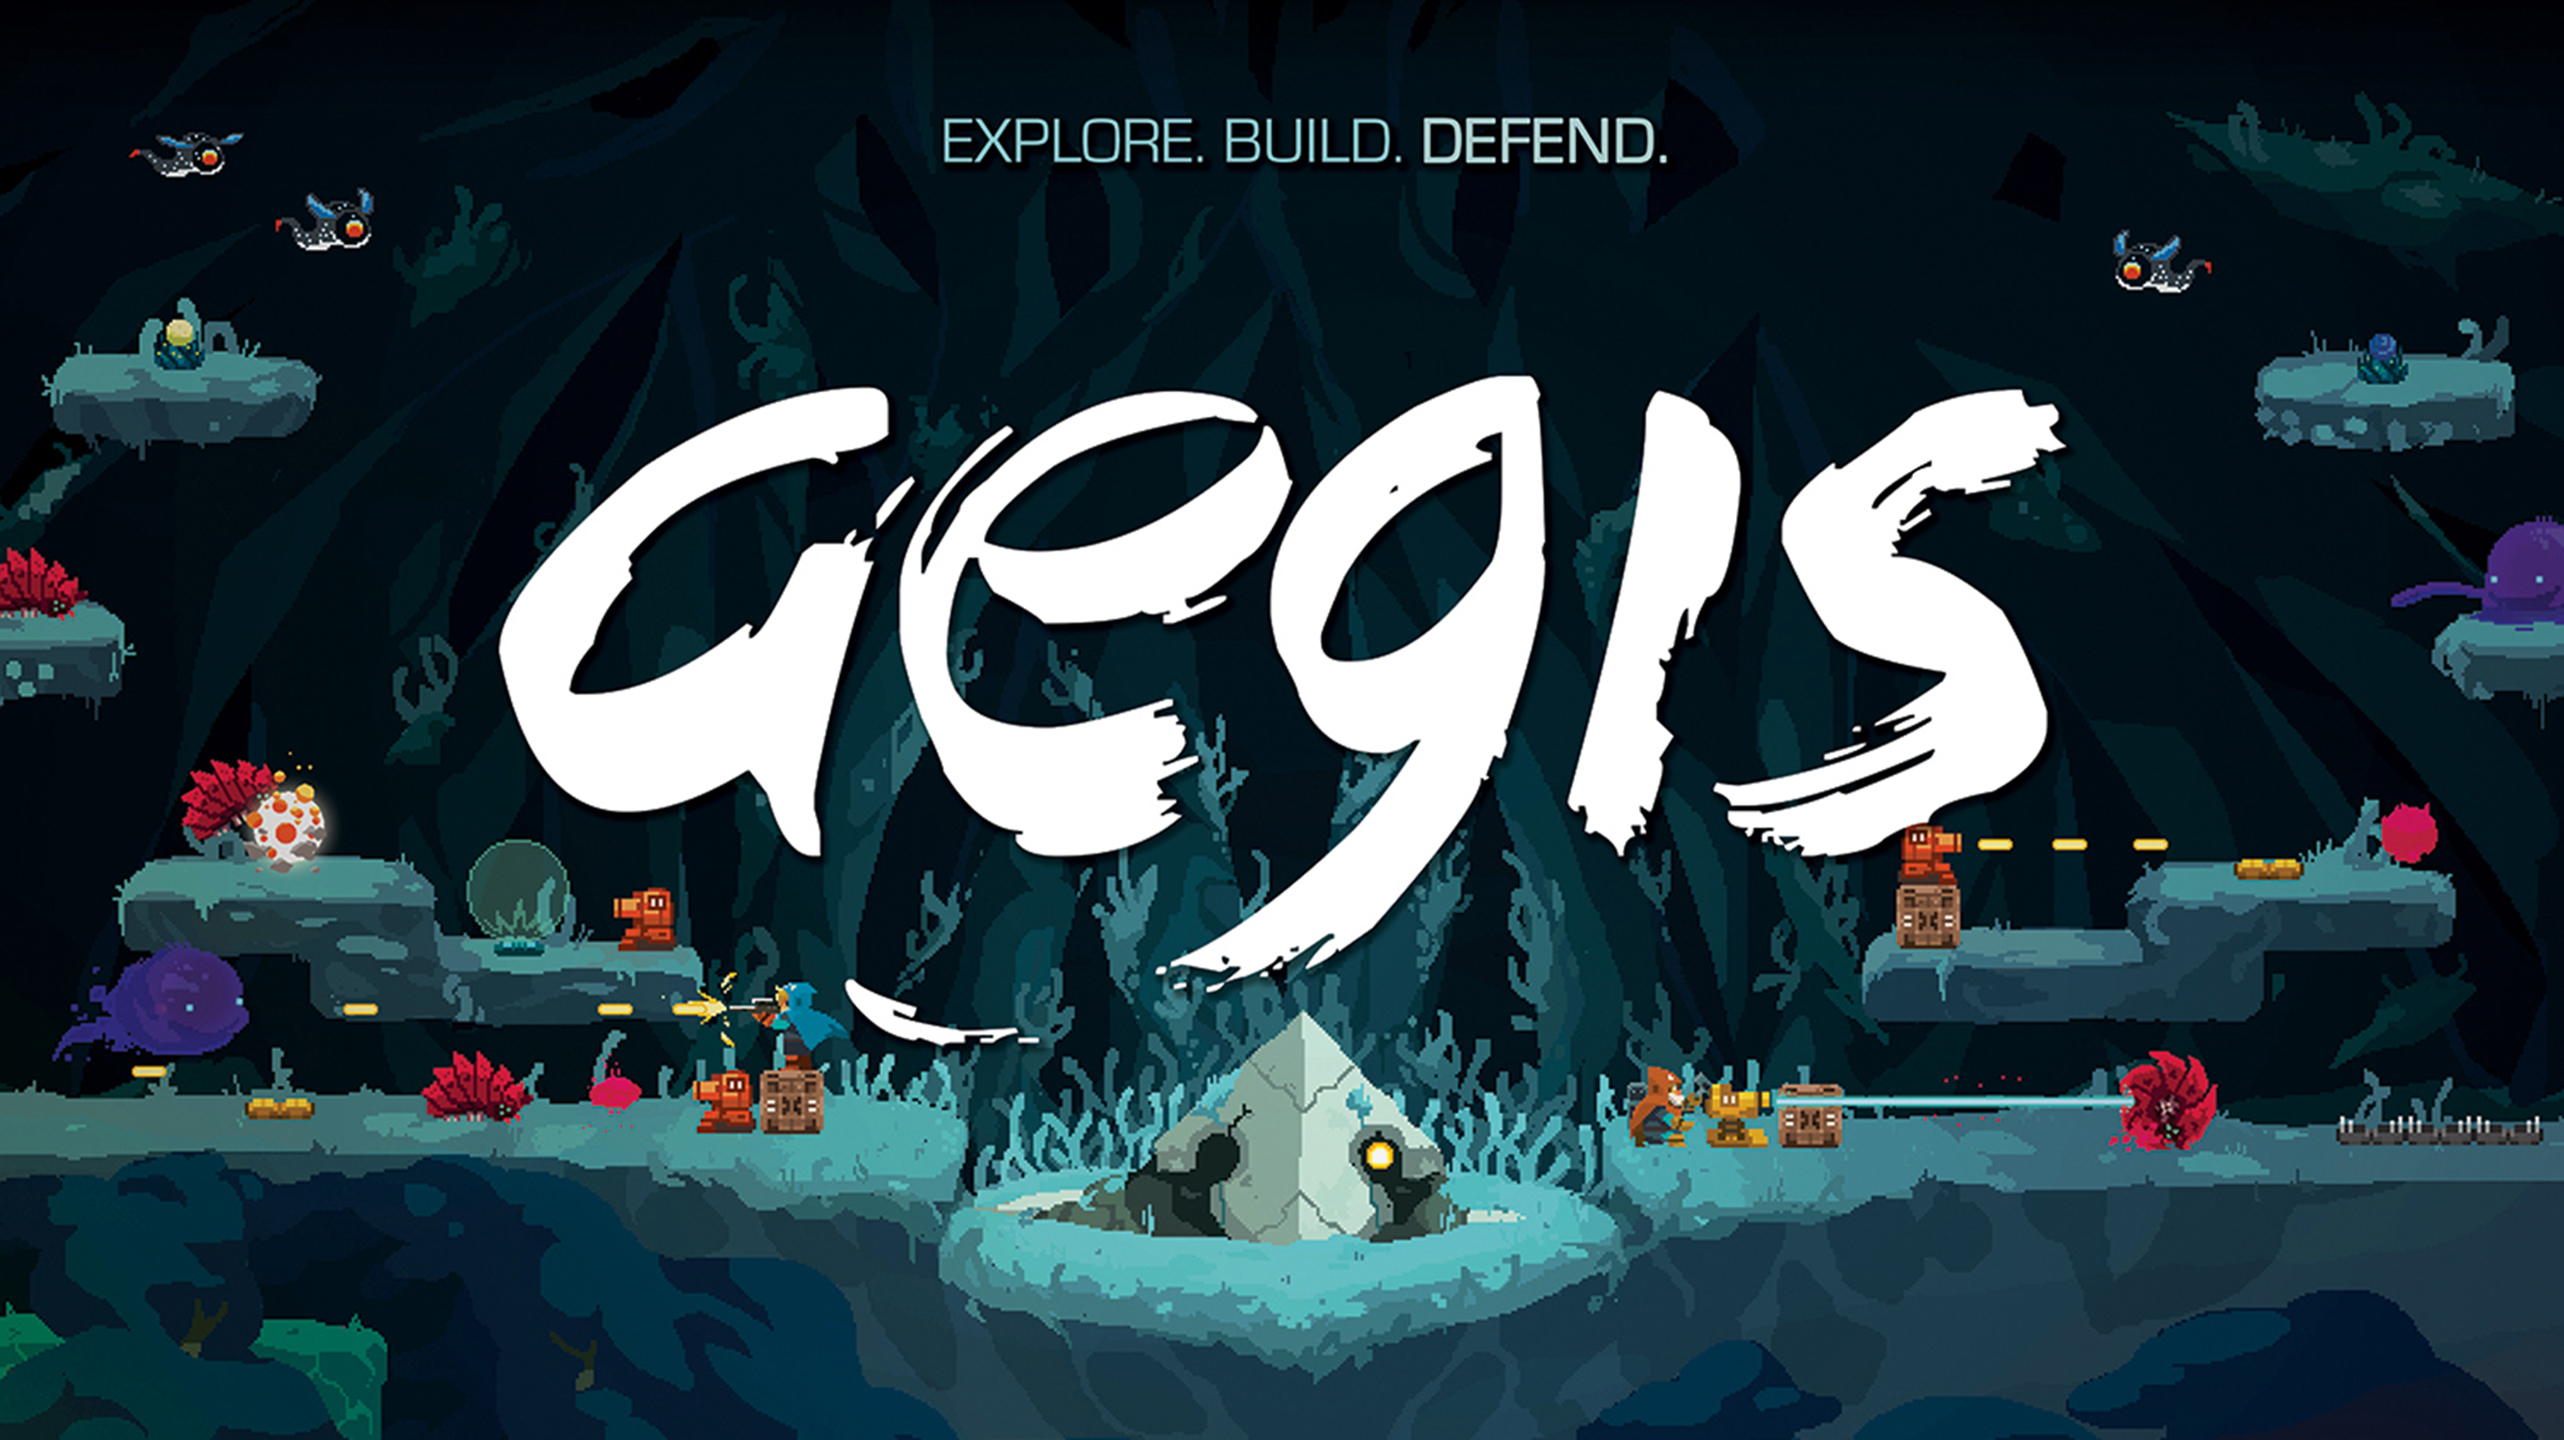 download the new for mac Aegis Descent